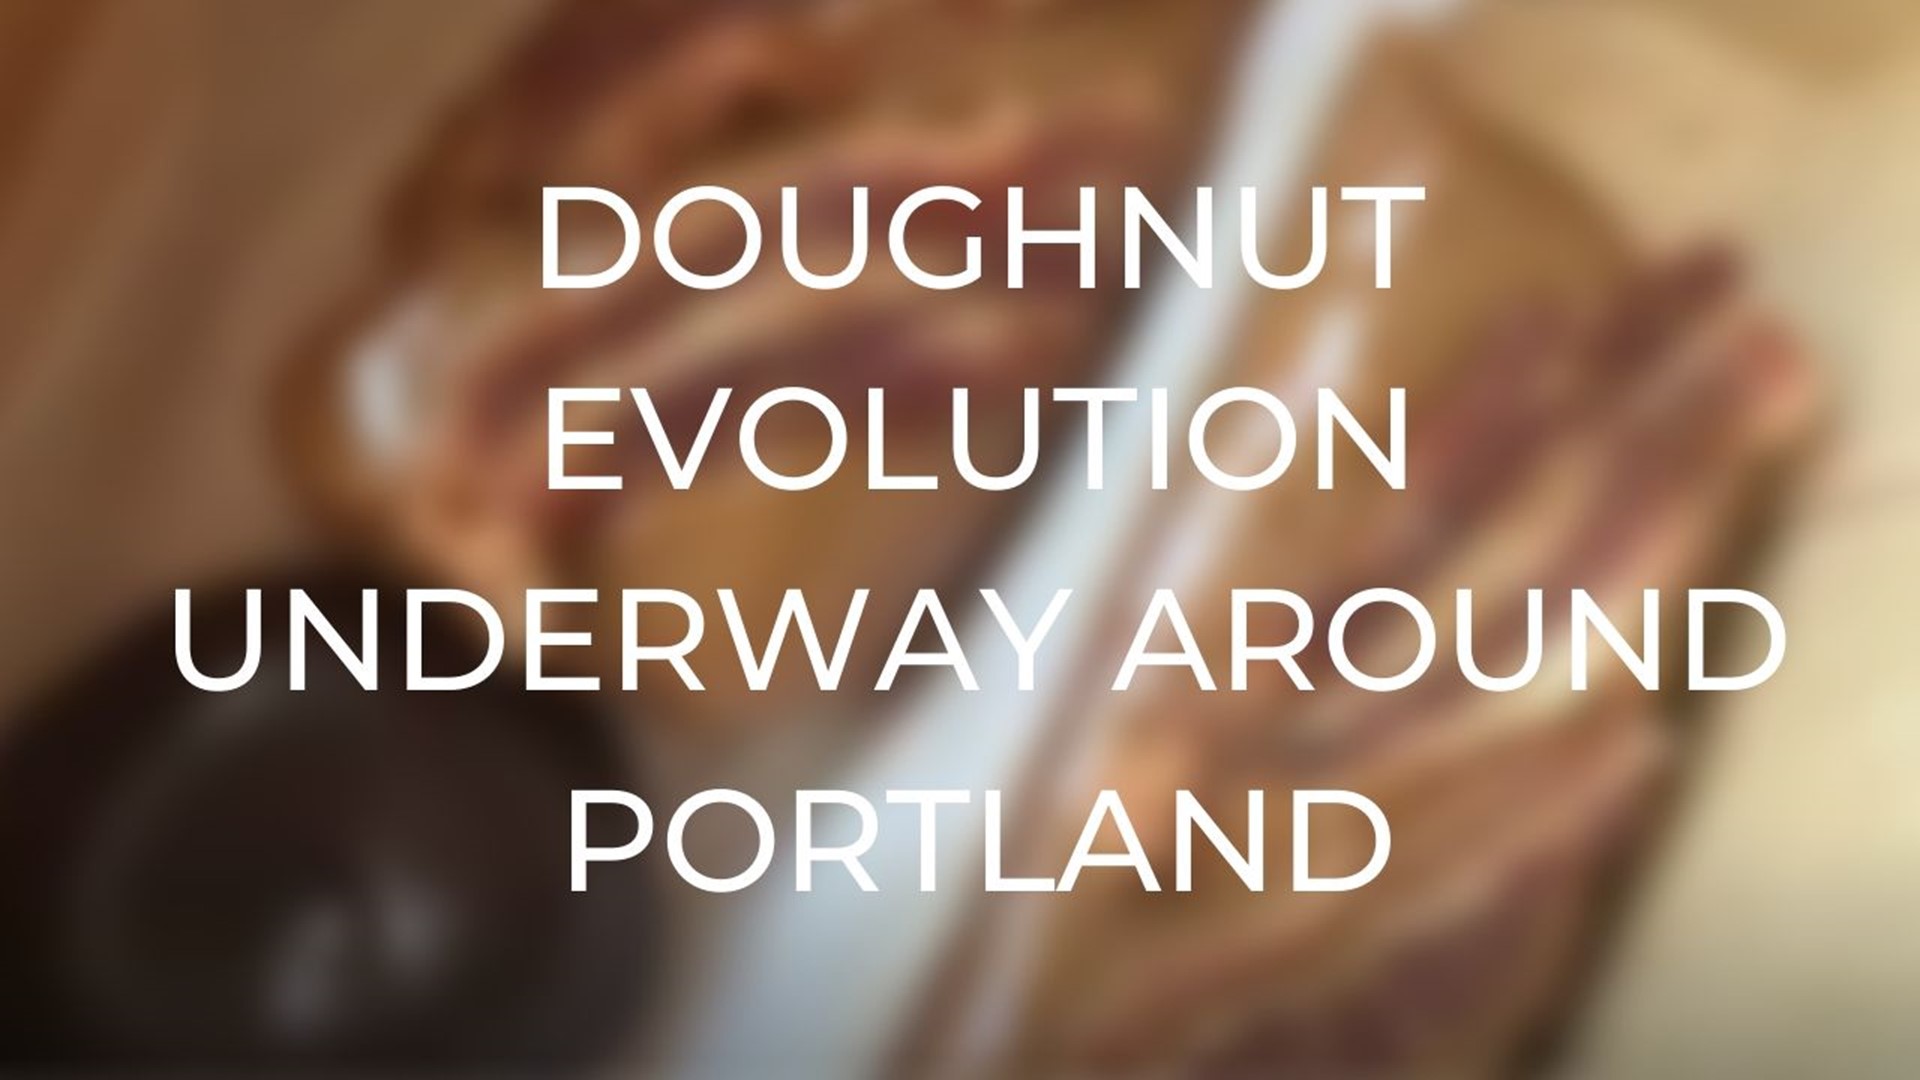 There is a doughnut evolution underway around the city of Portland. Keely Chalmers explains.